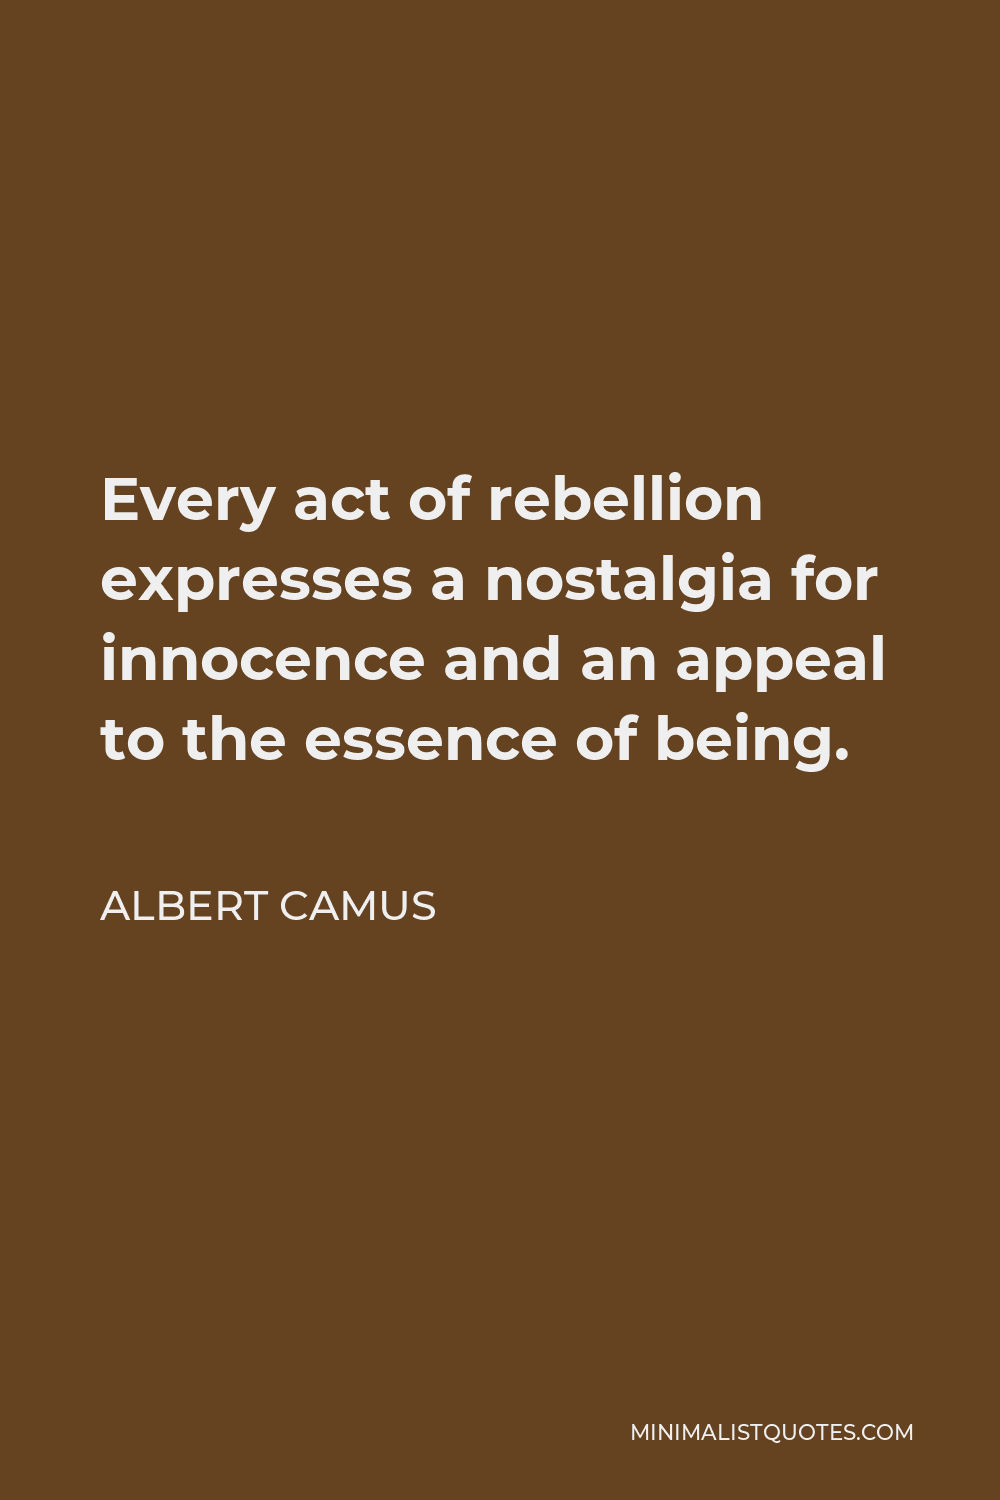 Albert Camus Quote - Every act of rebellion expresses a nostalgia for innocence and an appeal to the essence of being.